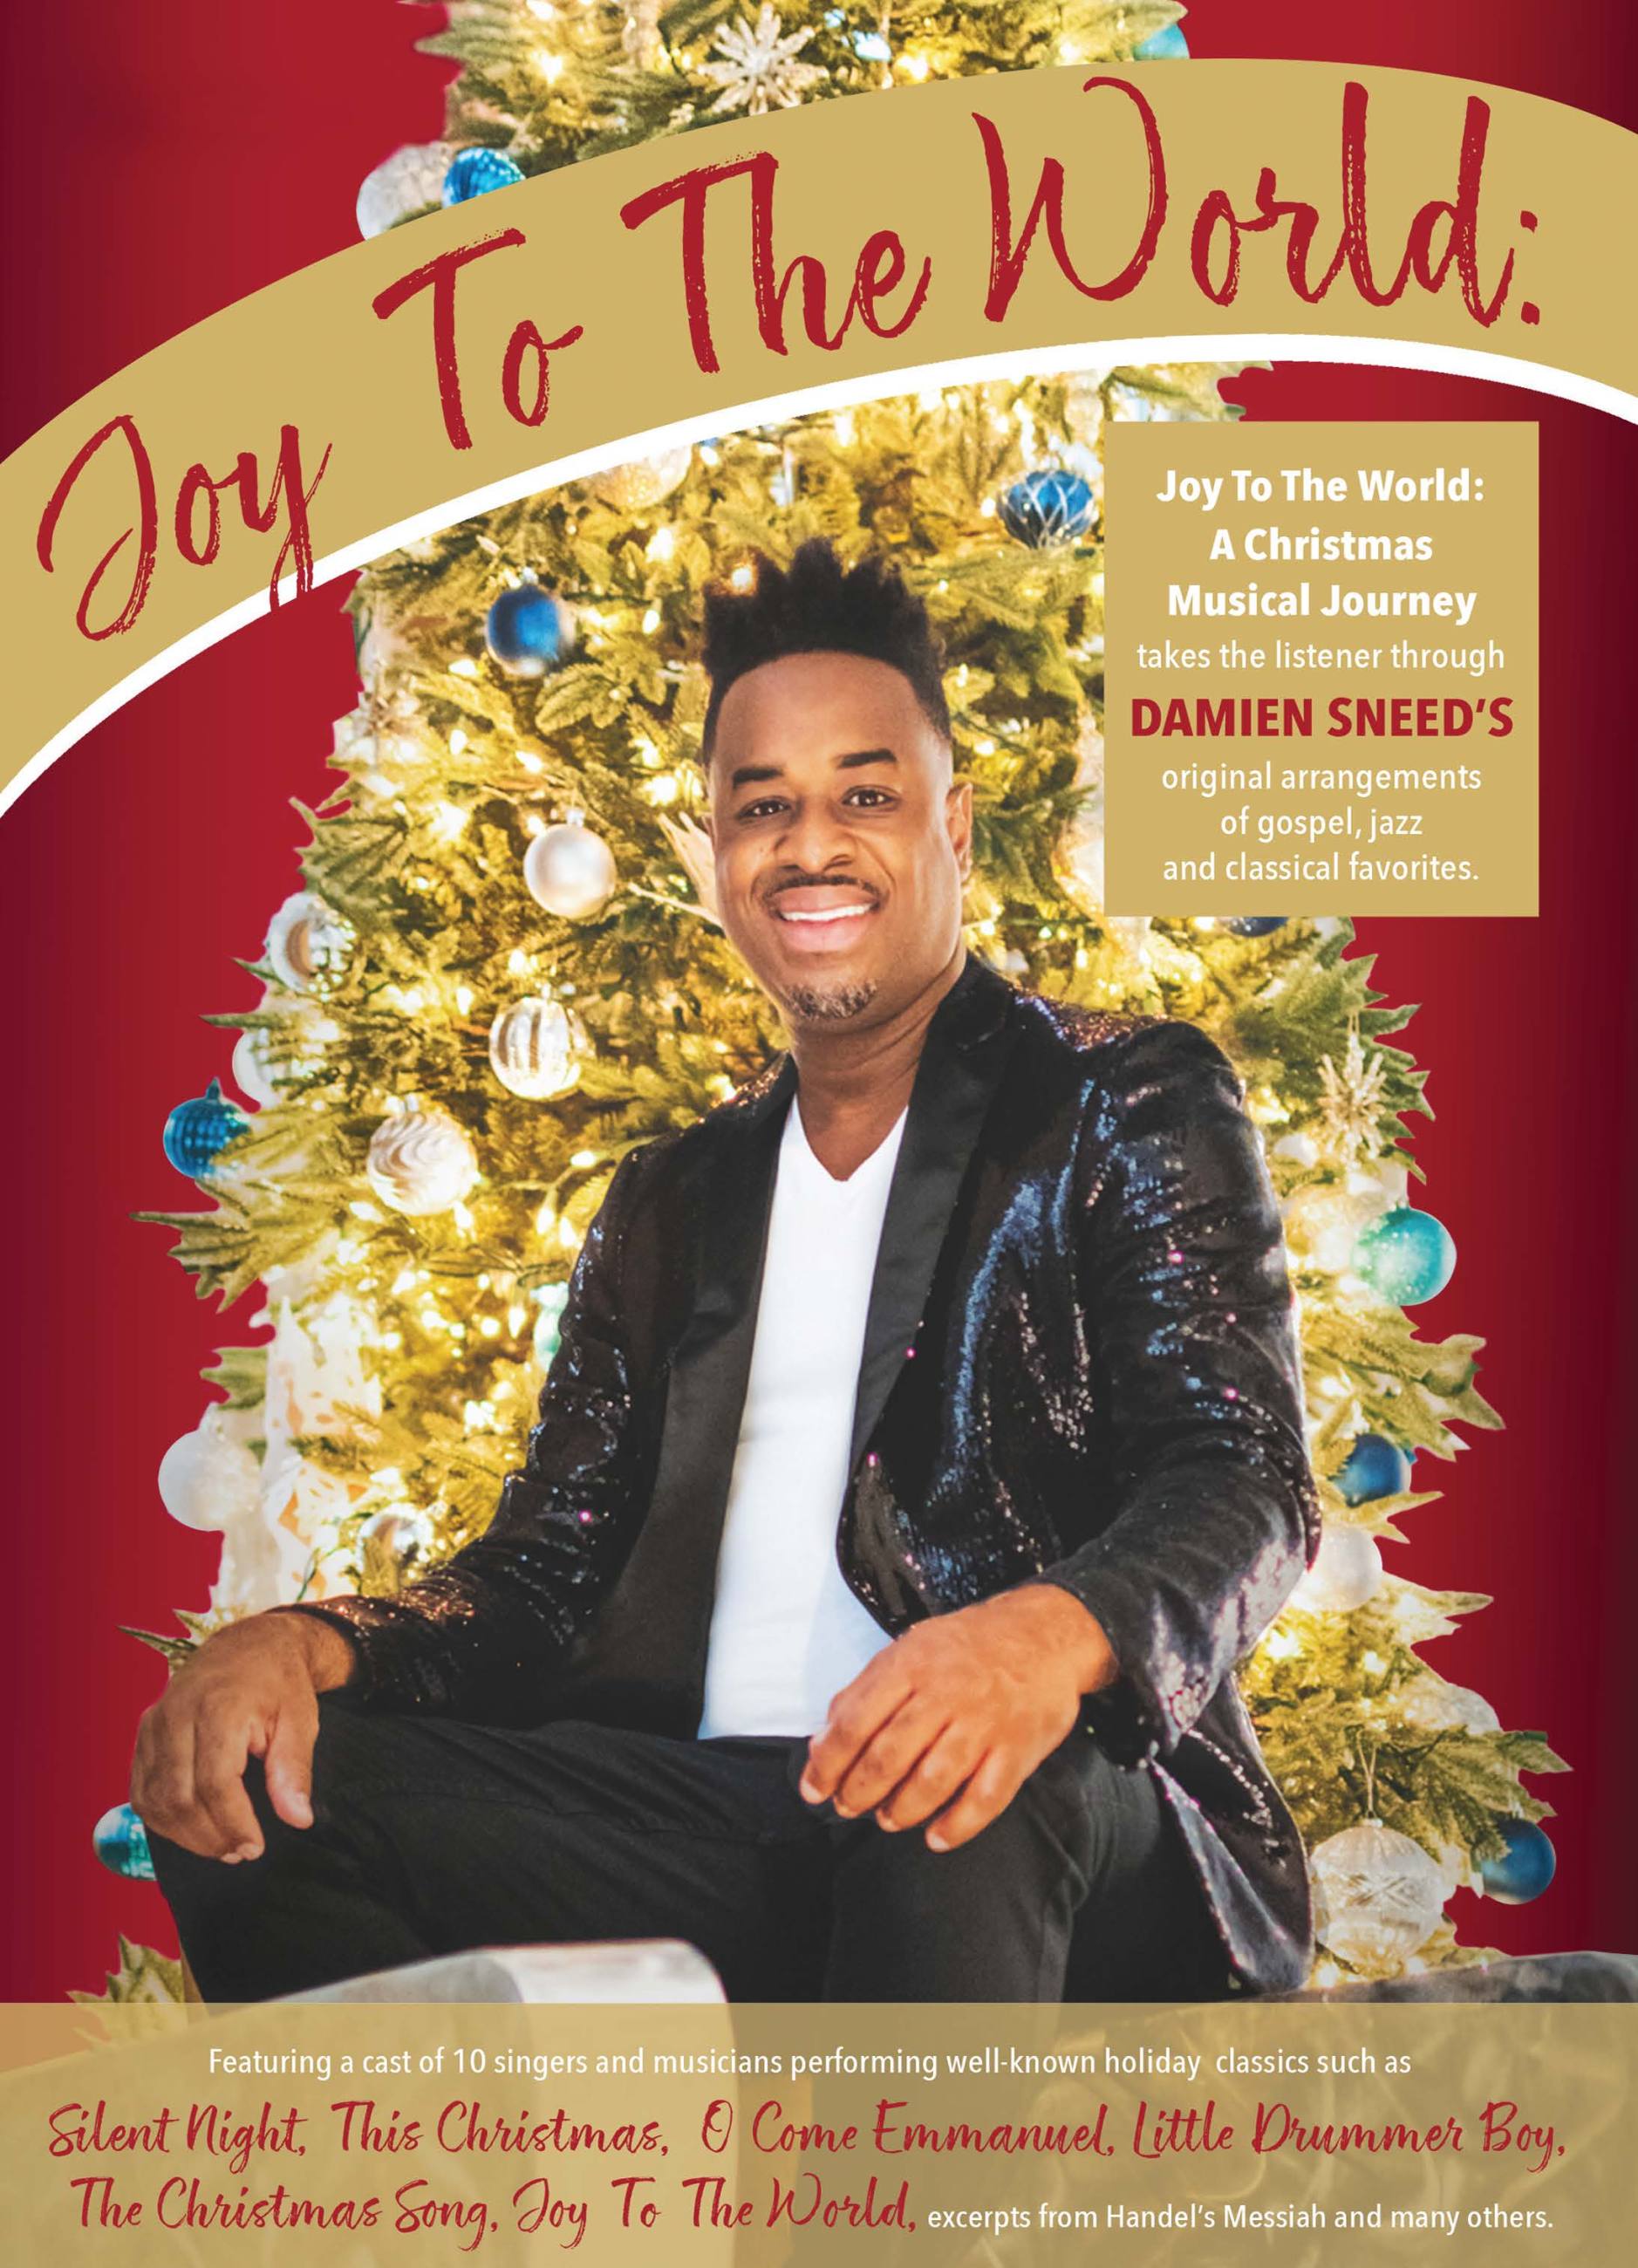 Damien Sneed sits in front of a lit Christmas tree with blue ornaments and a red backdrop. Text on the top of the image reads: Joy to the World